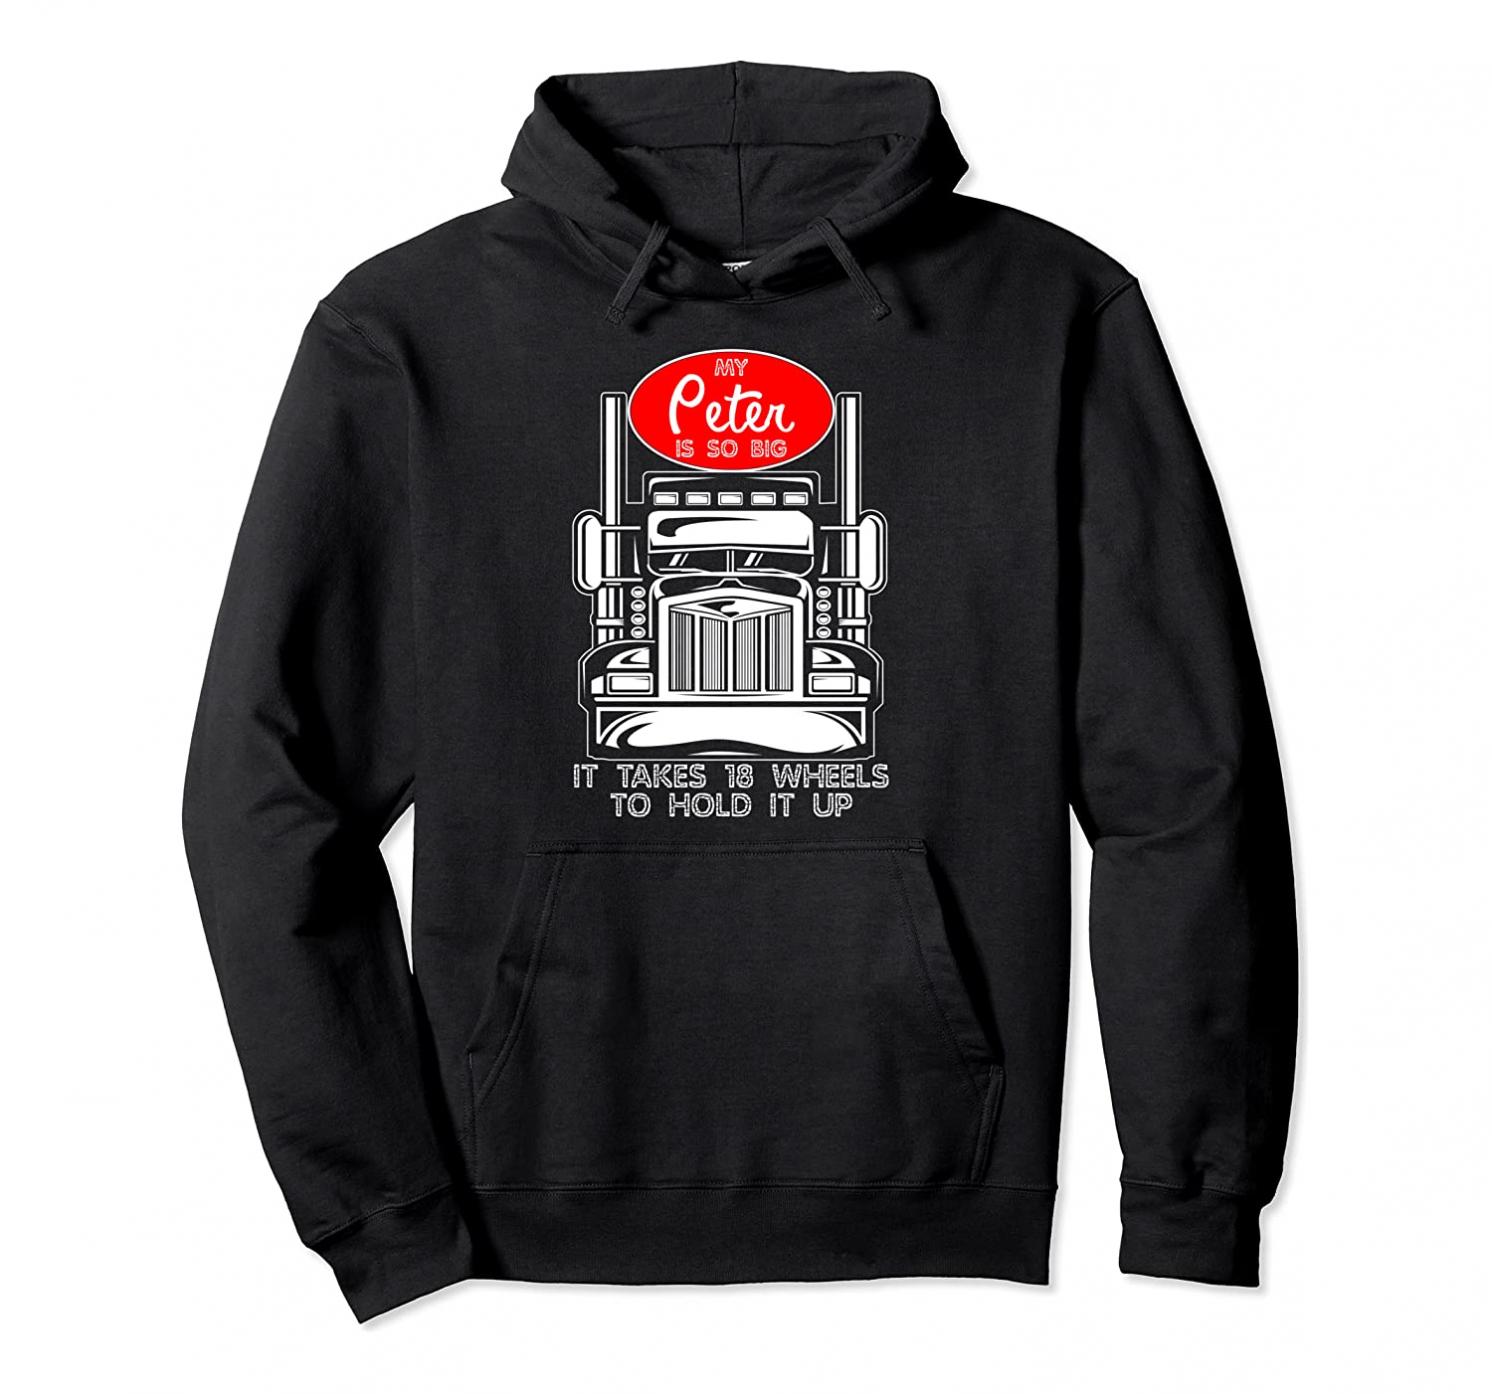 Funny Trucker Gift for Men My Peter is so Big Truck Driver Pullover Hoodie